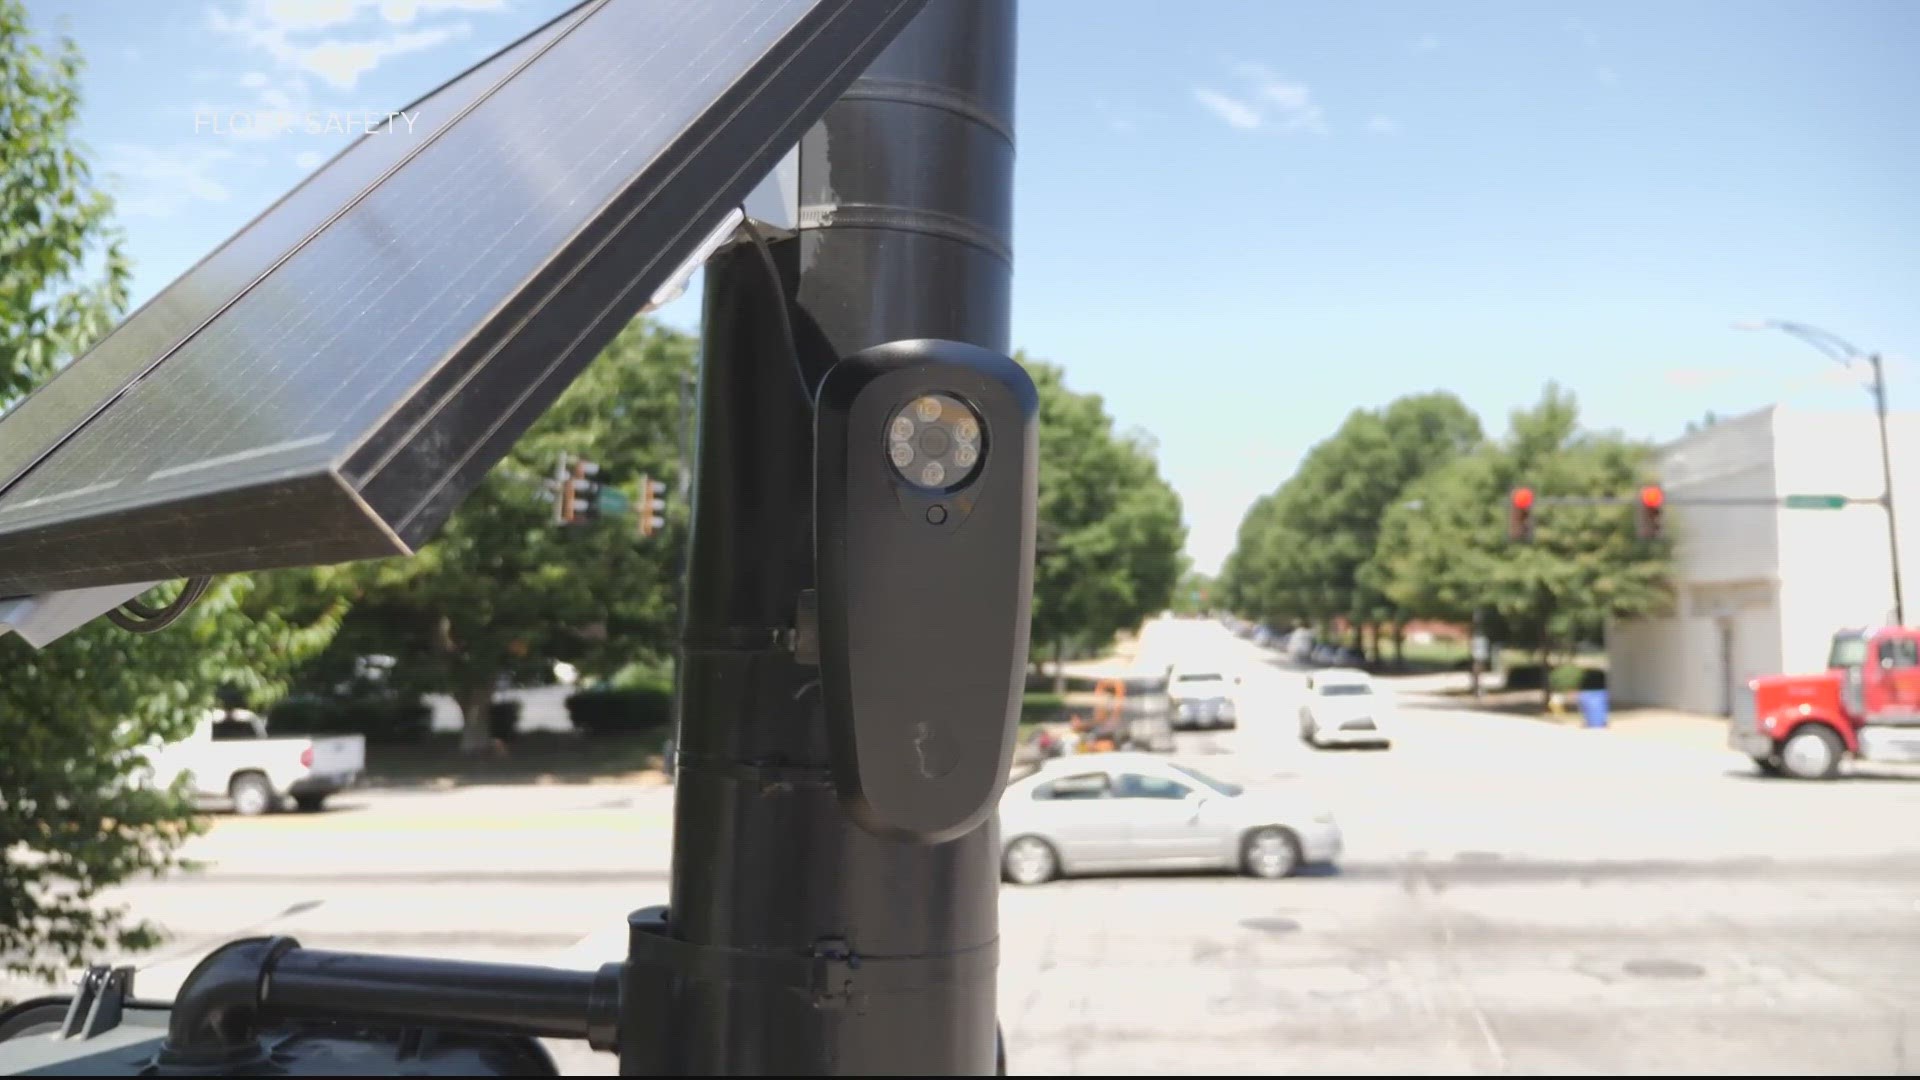 The Fairfax County Police Department credits license plate readers with helping them take down a retail theft crew from Philadelphia.